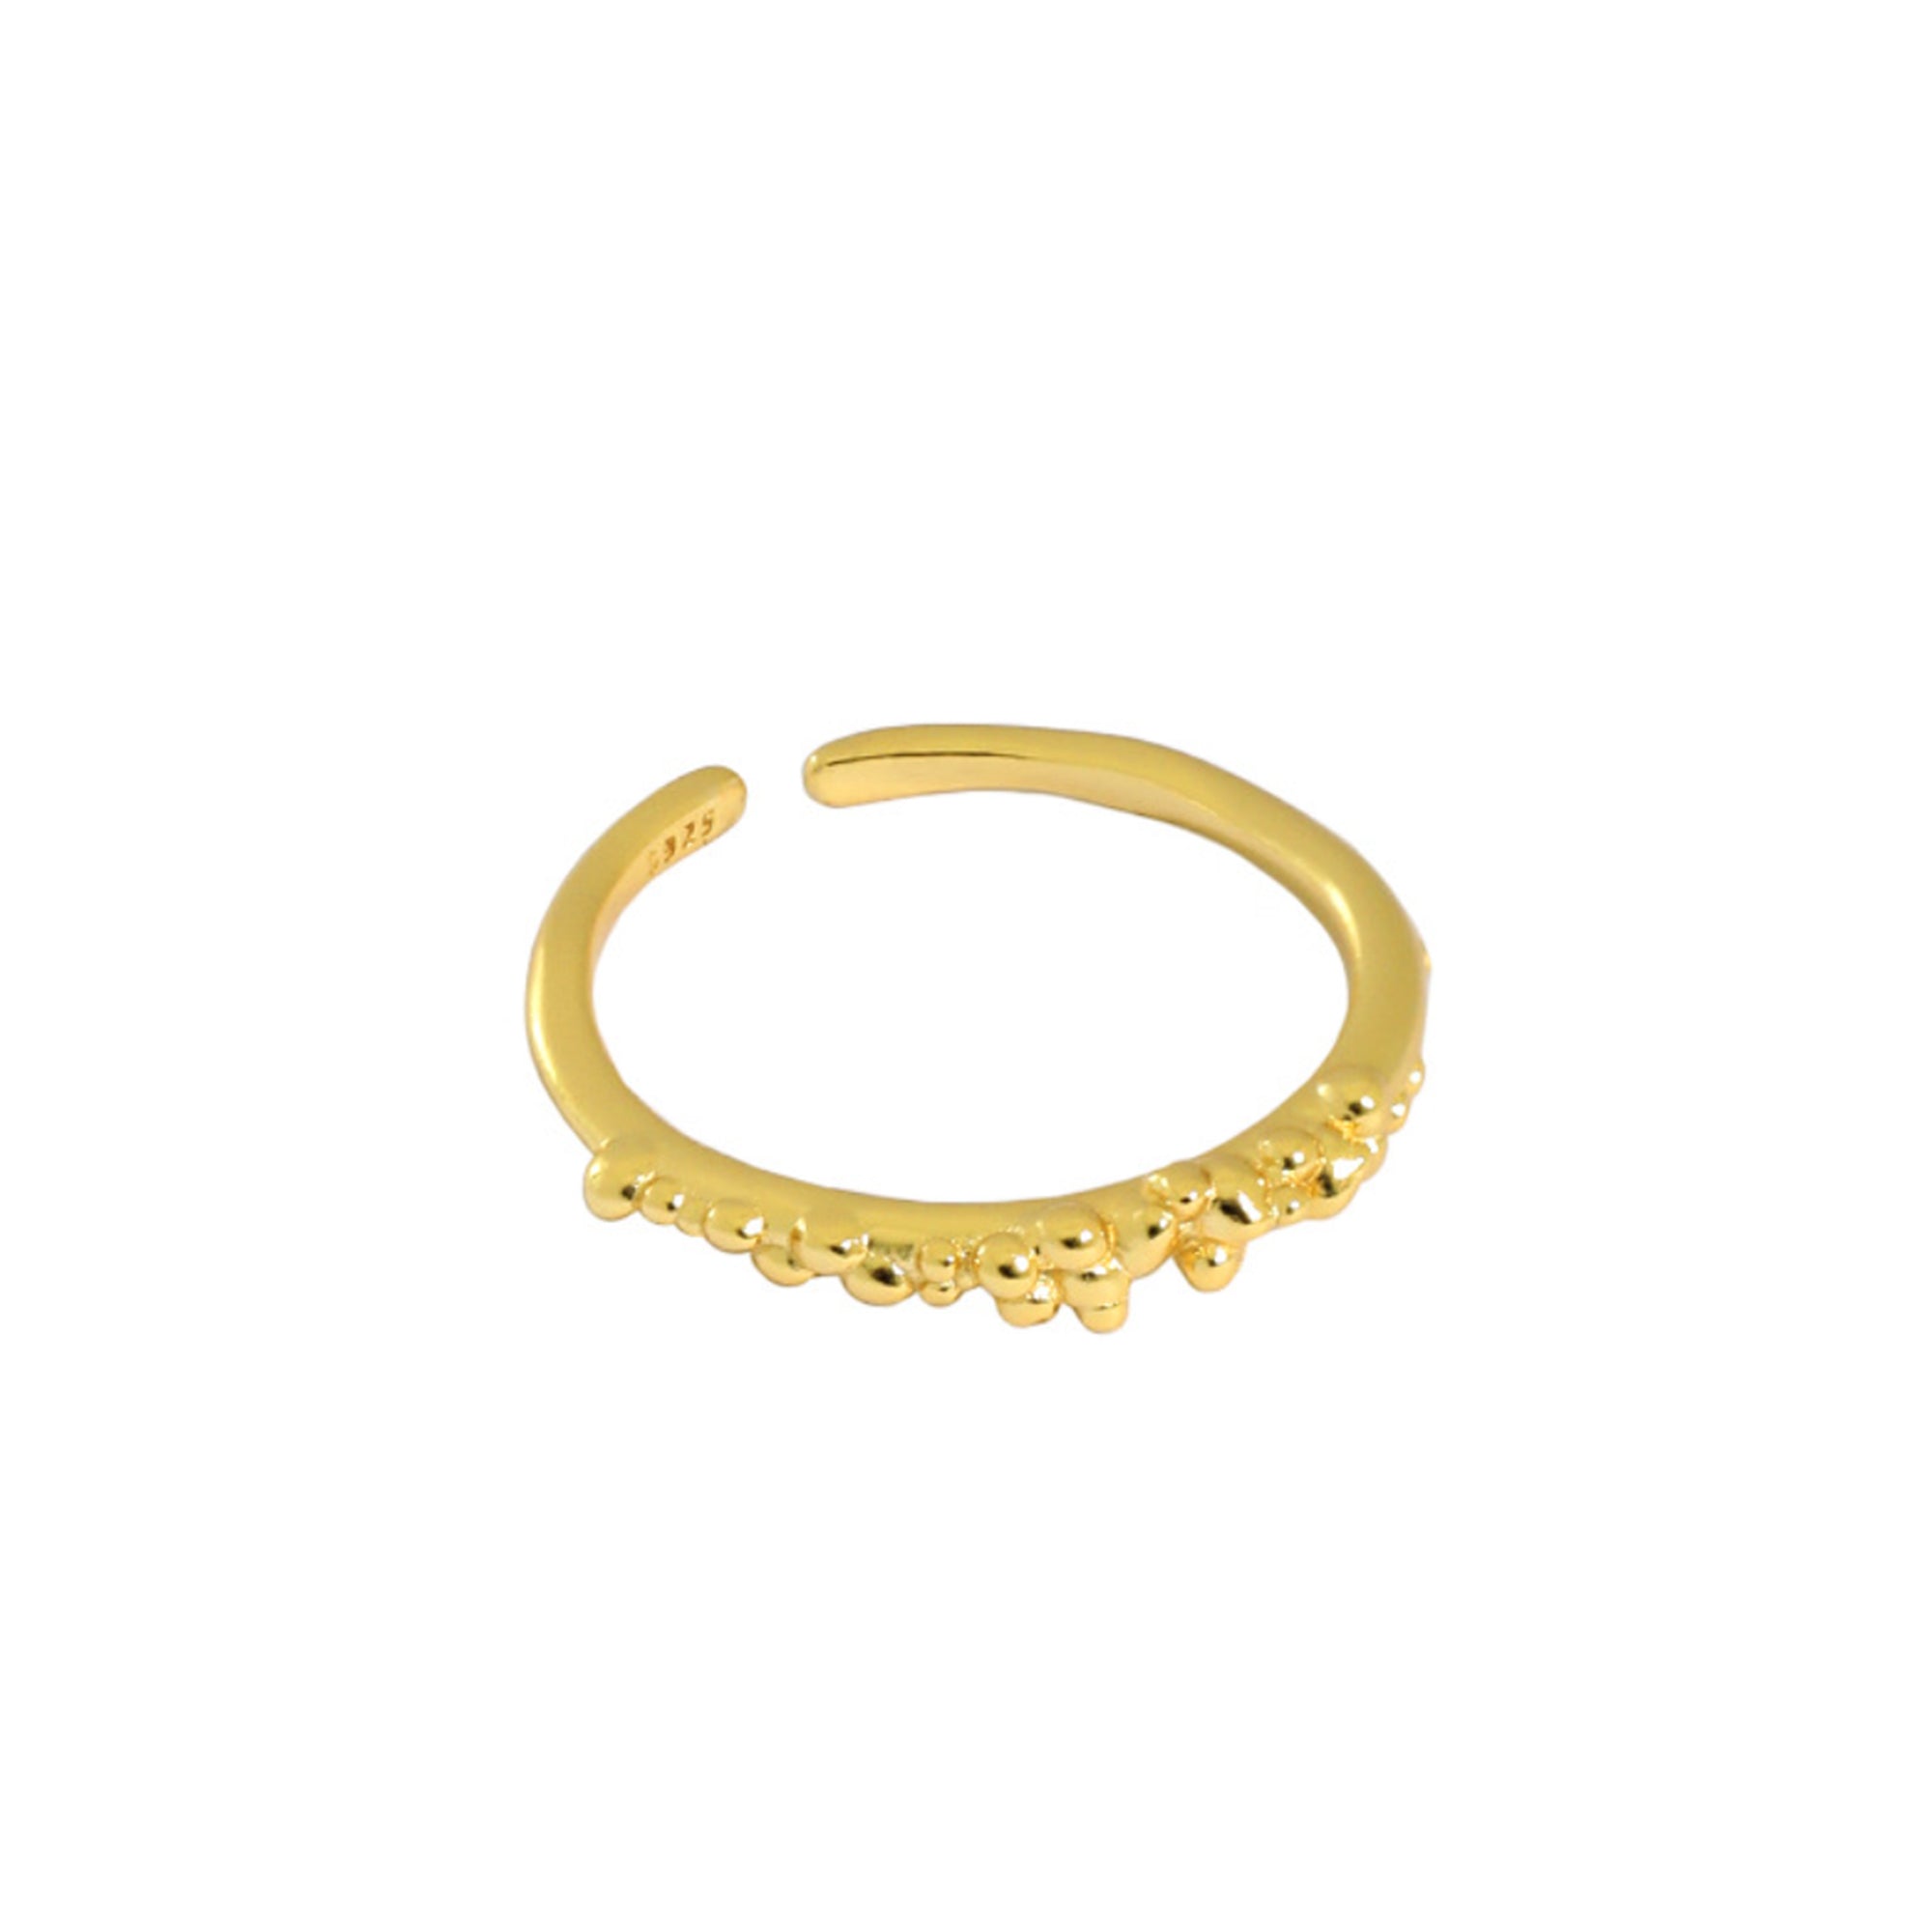 A gold vermeil ring. The ring has a dainty band with a bubbled texture at the front.